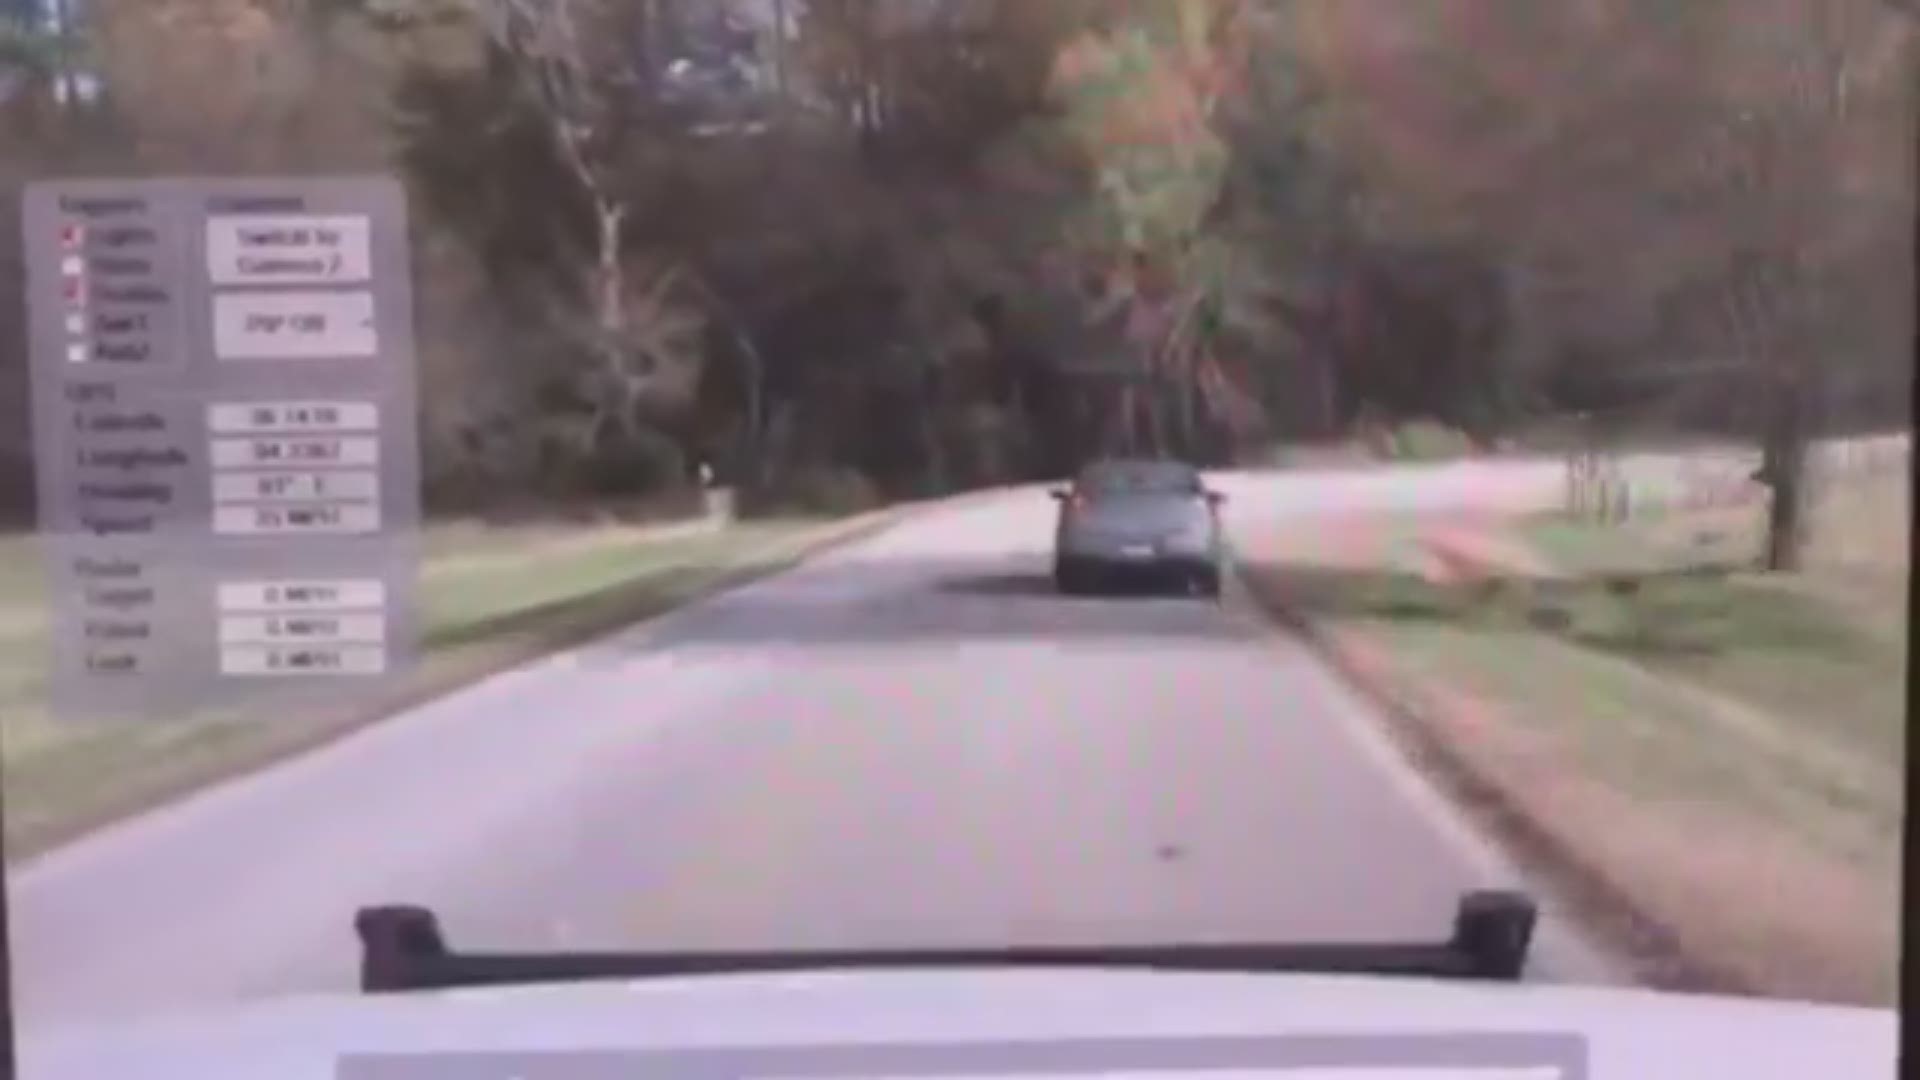 A man has been arrested after shooting at multiple police officers during a pursuit. [Video credit: Washington County Sheriff's Office]